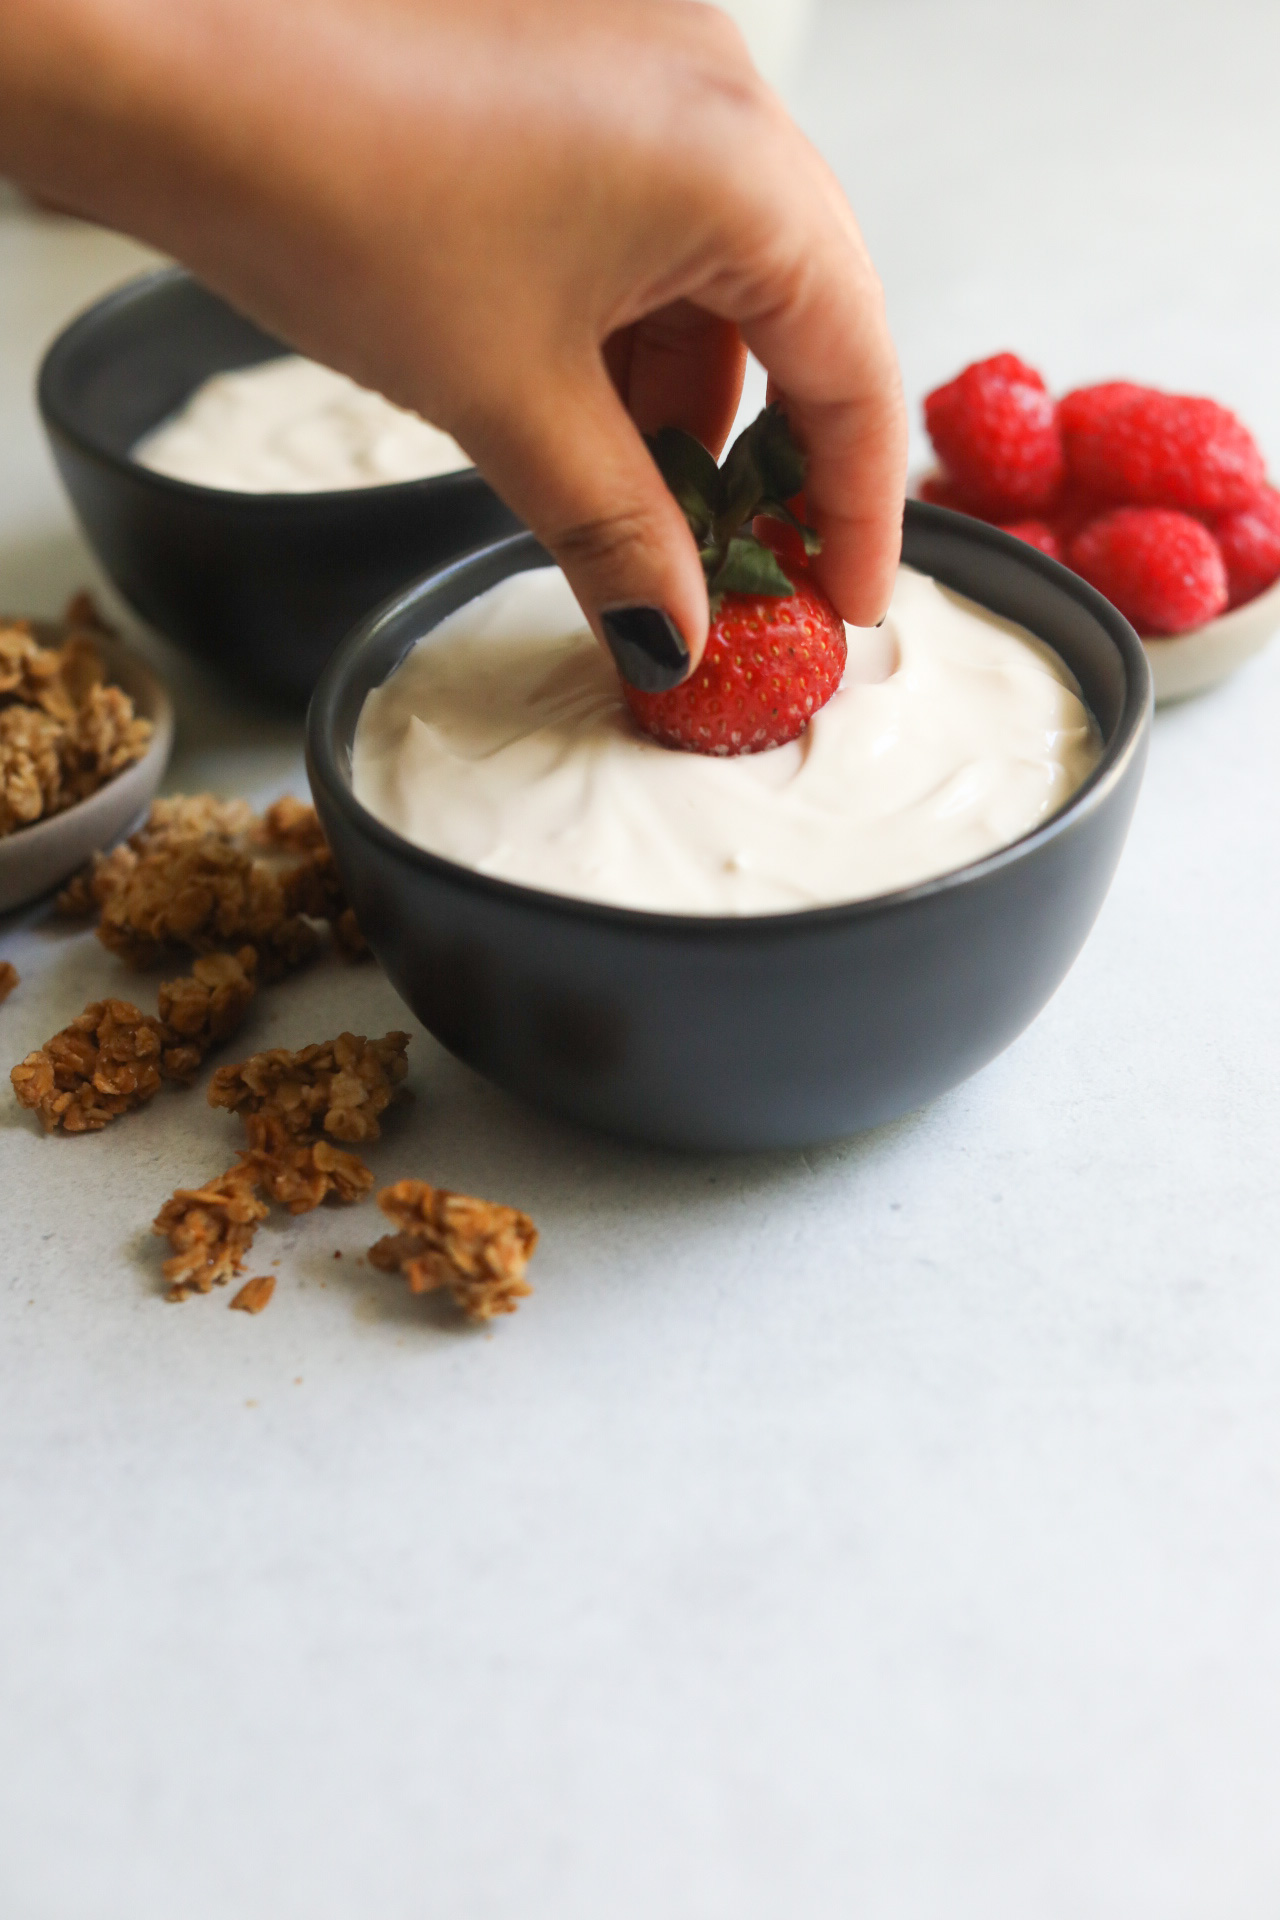 Hand dipped entirely into whipped yogurt to show as dipping sauce. Crumbled granola with small bowl of raspberries.